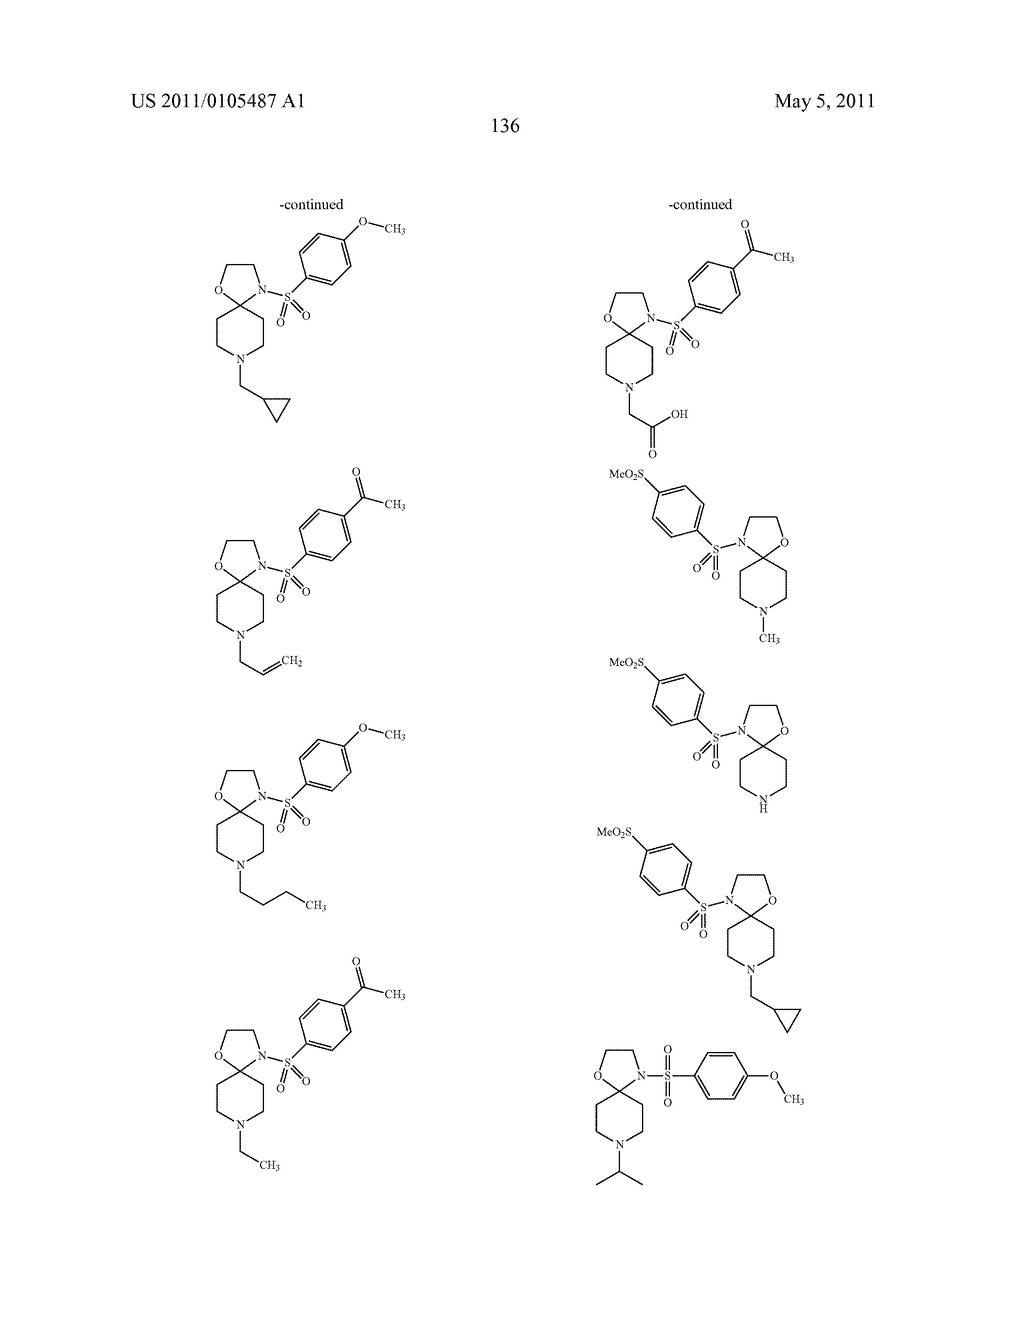 FILAMIN A BINDING ANTI-INFLAMMATORY AND ANALGESIC - diagram, schematic, and image 137